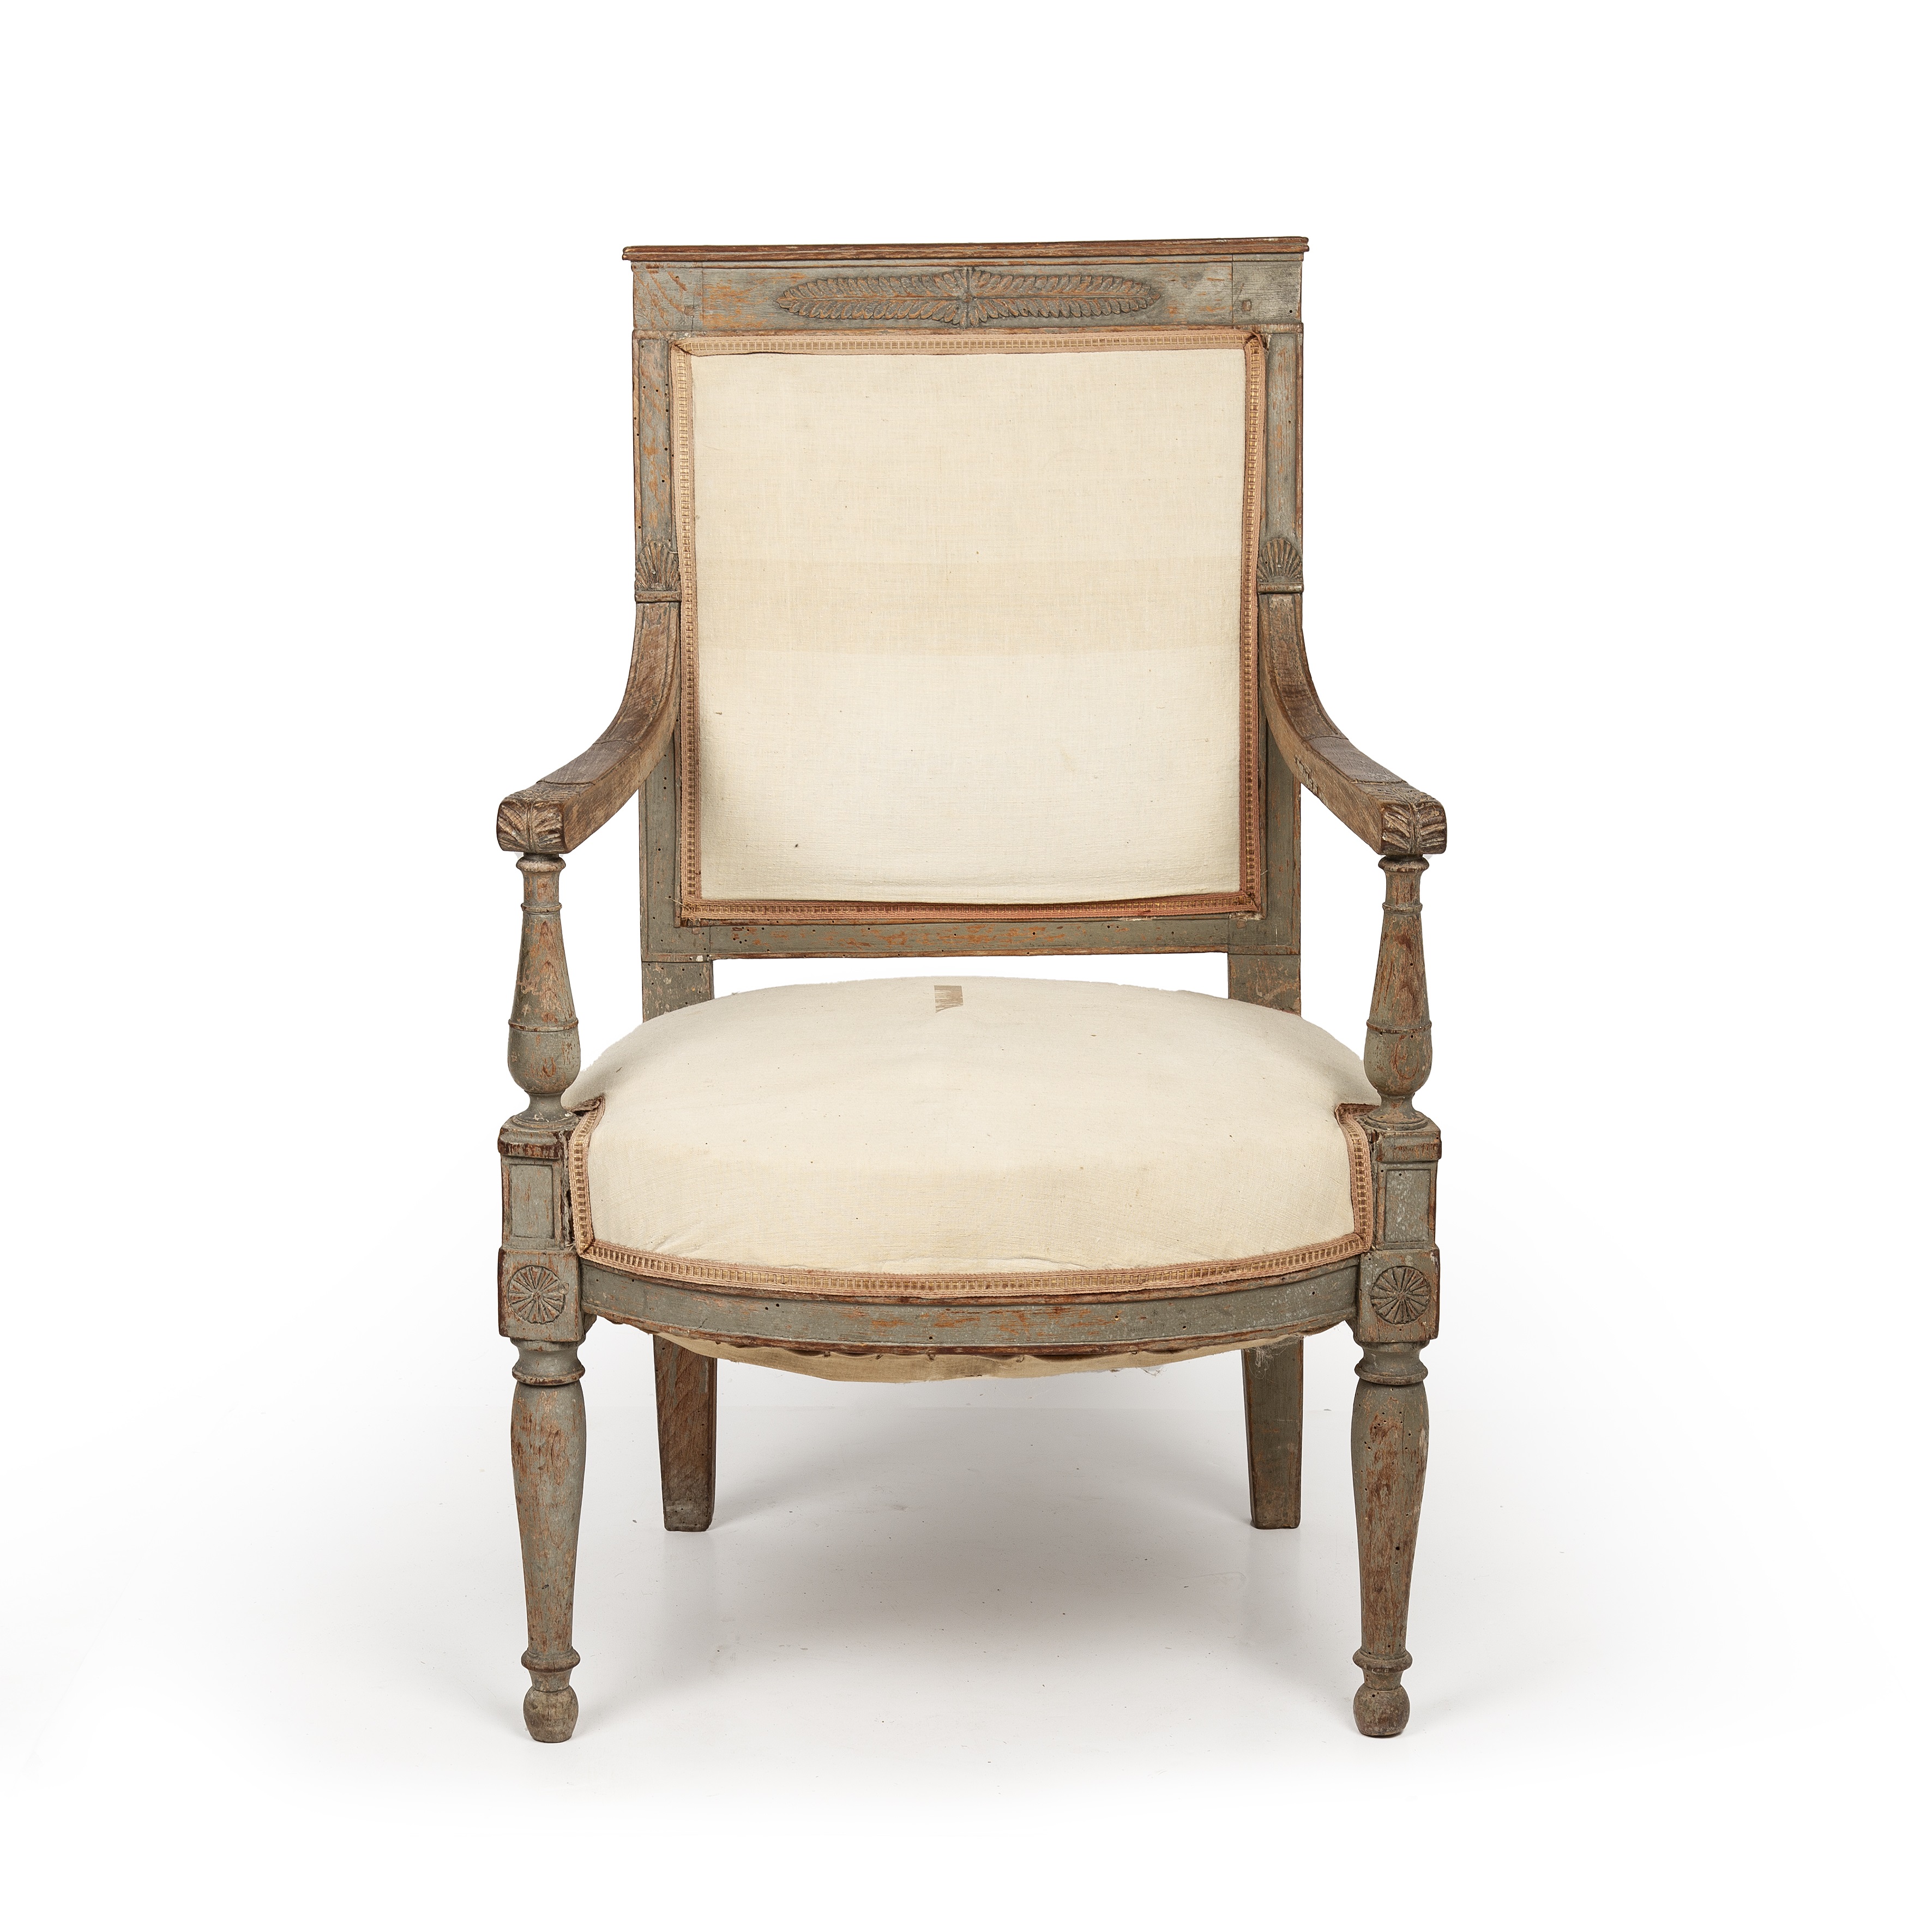 A 19th century French painted open armchair with a square back and turned legs 58cm wide 49cm deep - Image 2 of 4